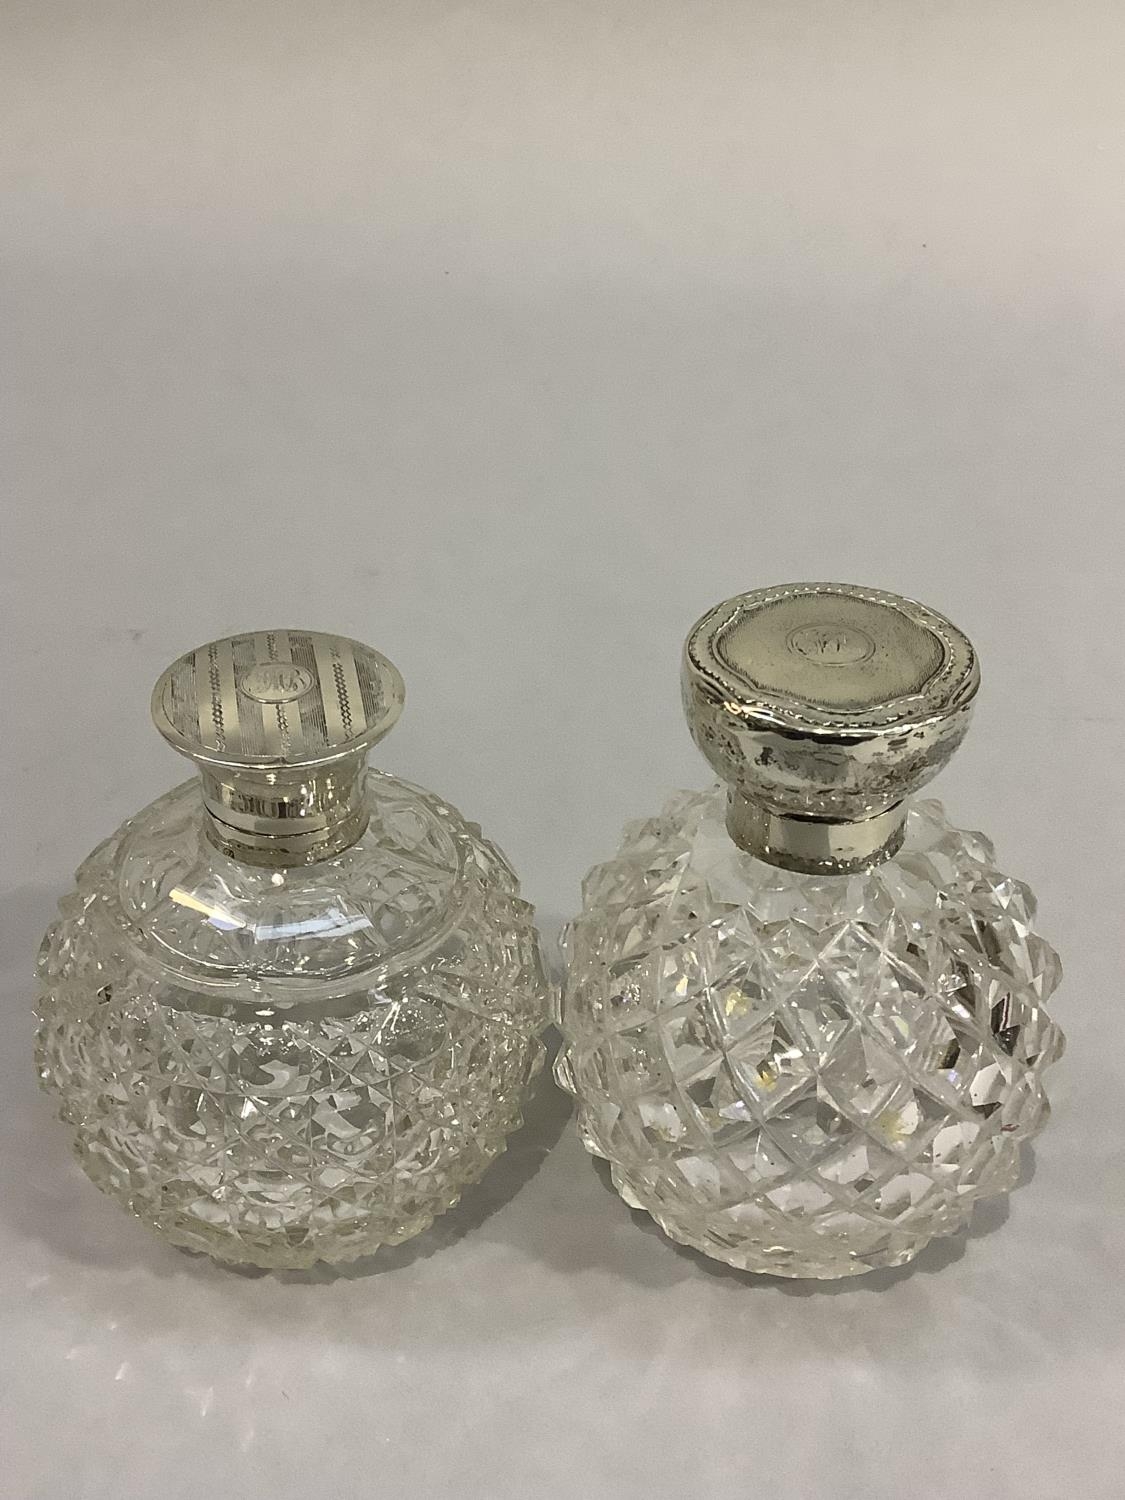 TWO GLOBULAR DIAMOND CUT GLASS SCENT BOTTLES with silver collars and hinged tops, Birmingham 1913 - Image 2 of 3